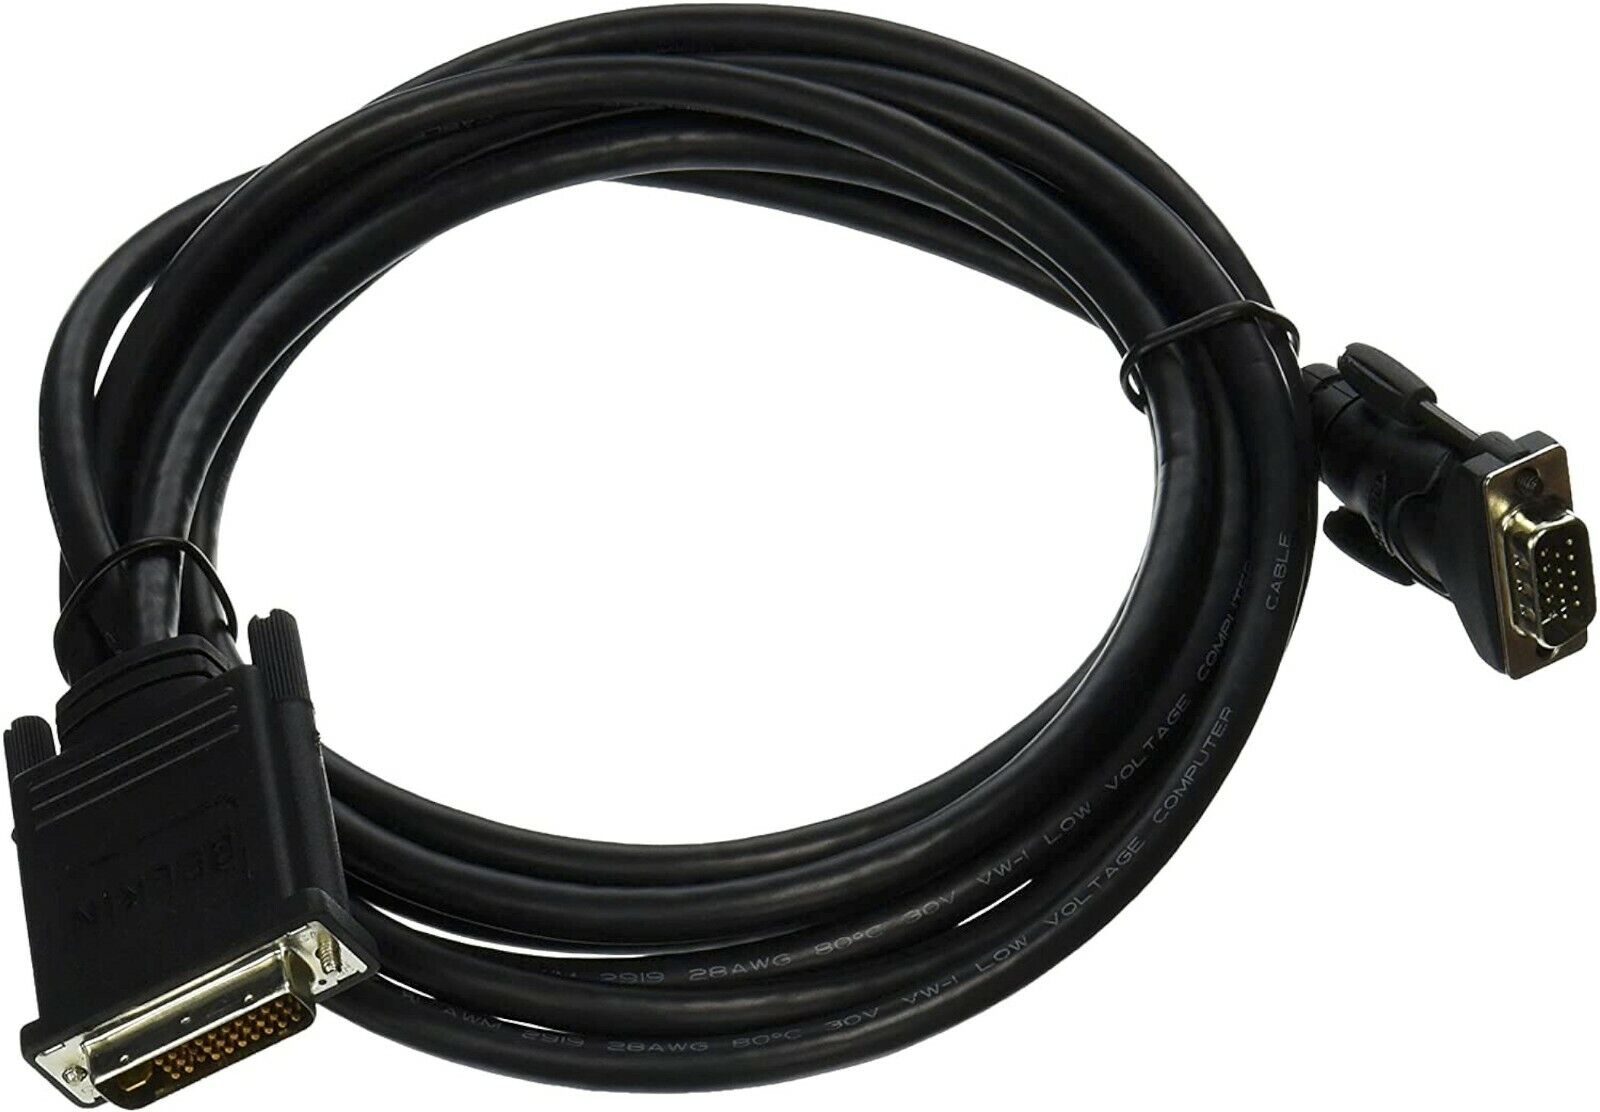 NEW Belkin F3X1991-10 M1 to VGA Projector Cable 10-foot Video Cord